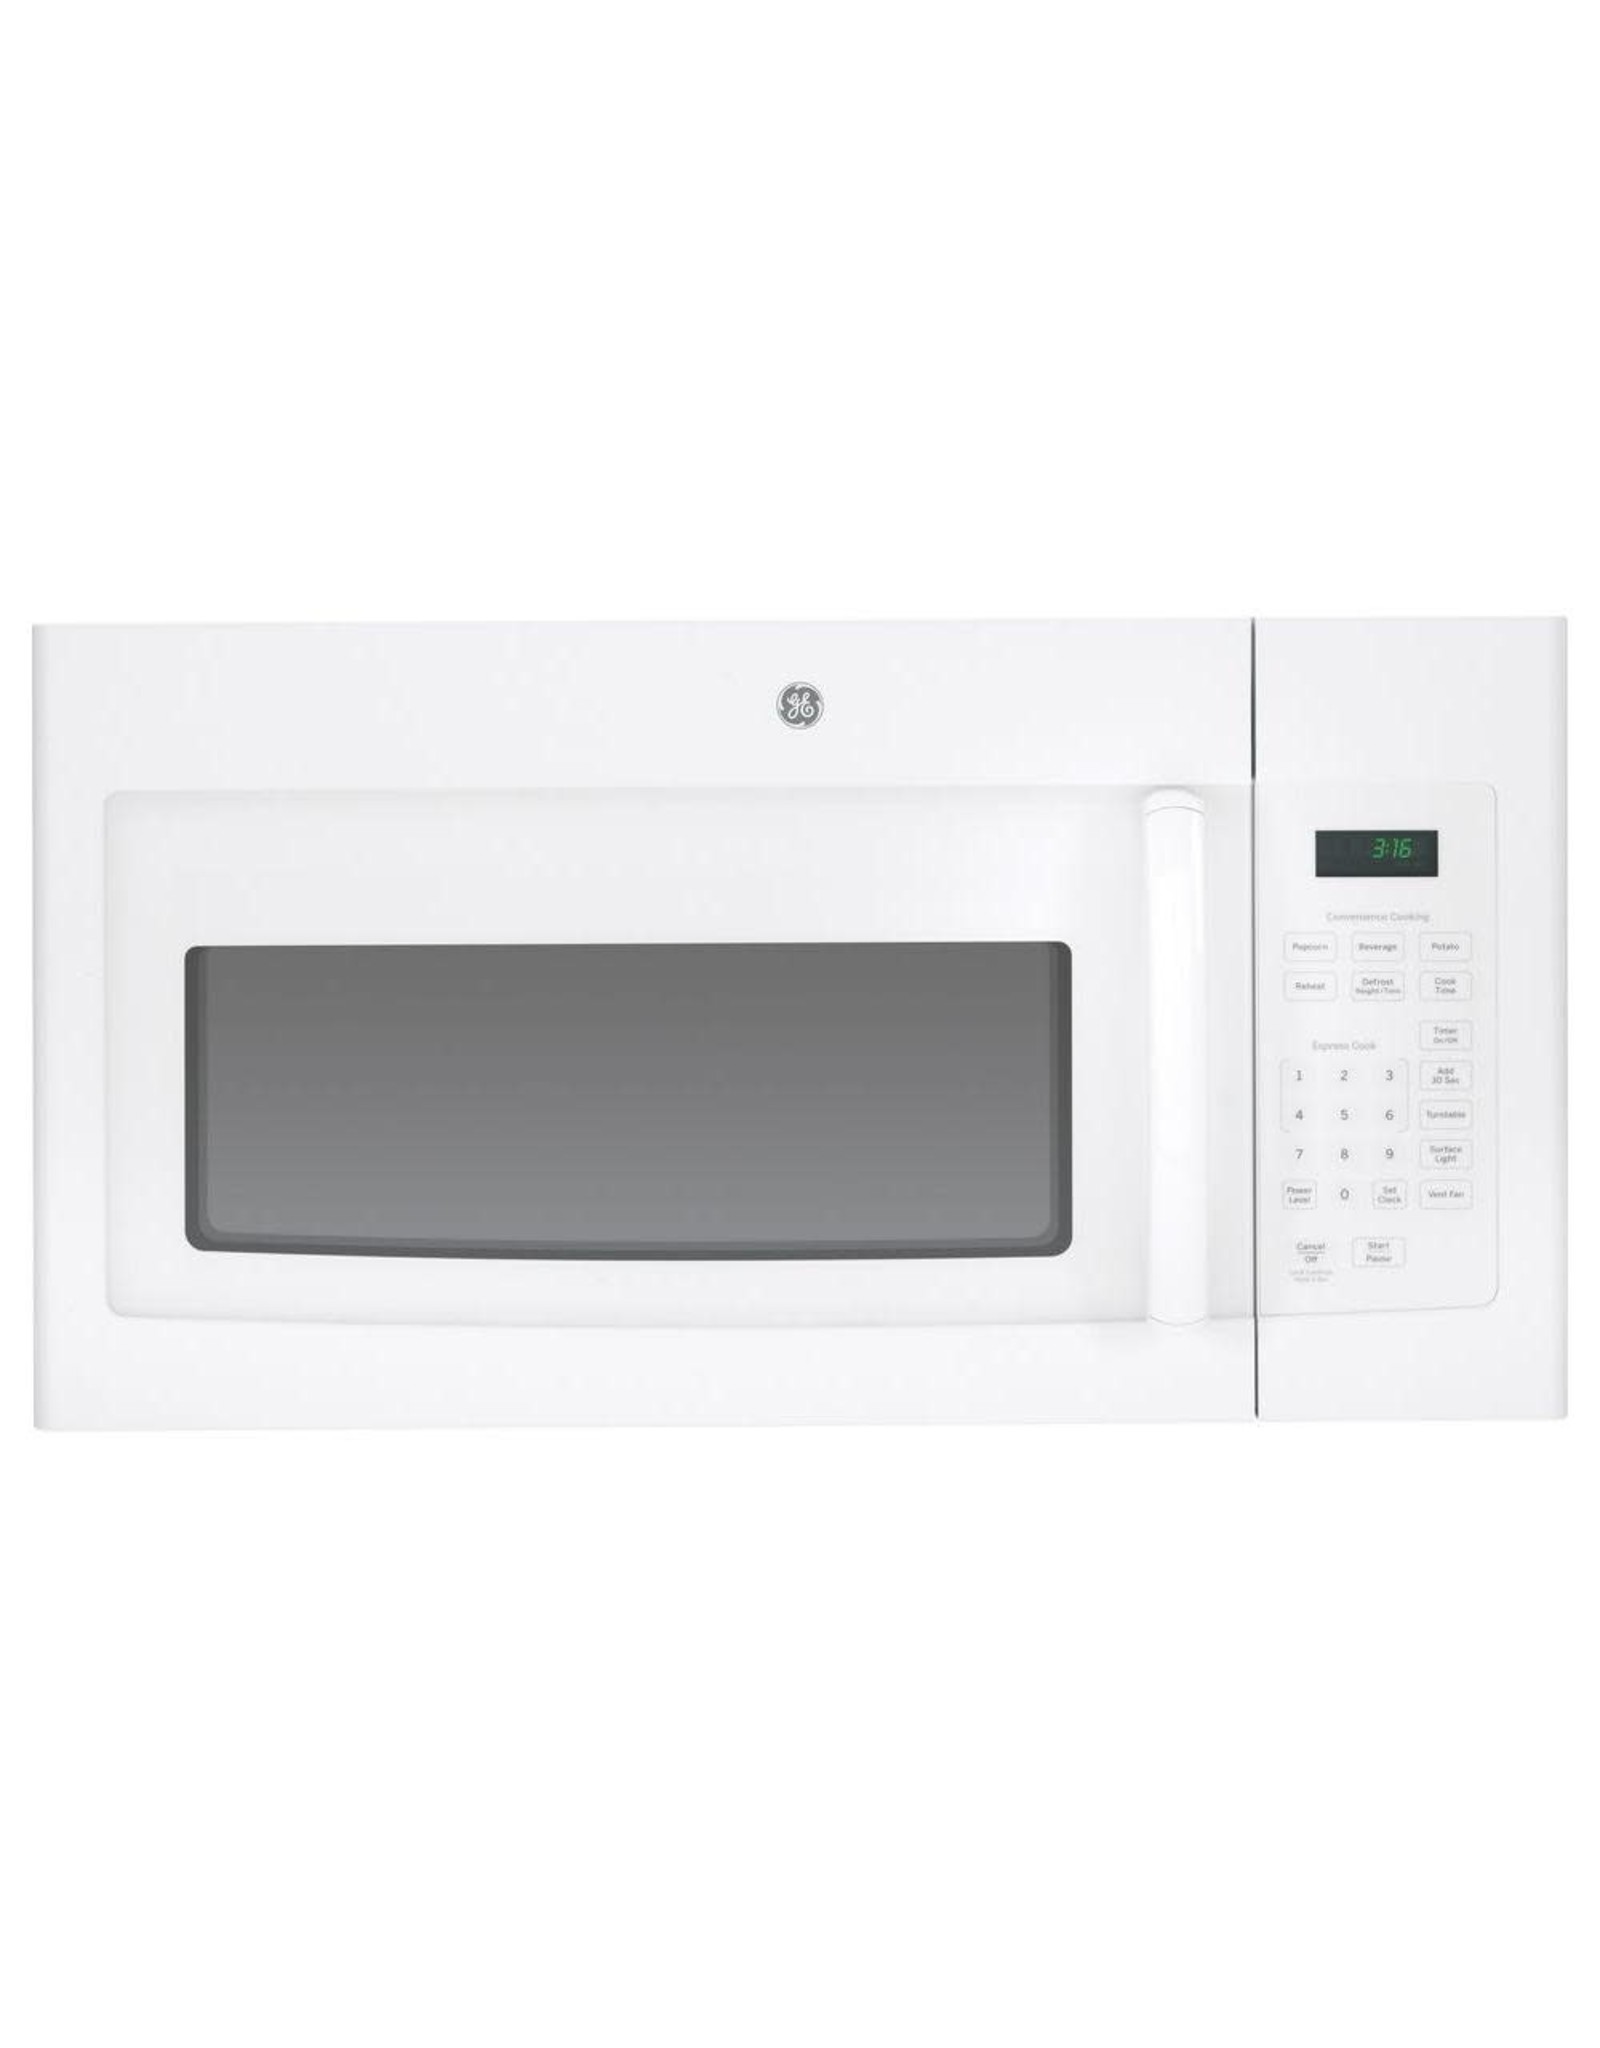 JVM3160DF5WW 1.6 cu. ft. Over the Range Microwave in White